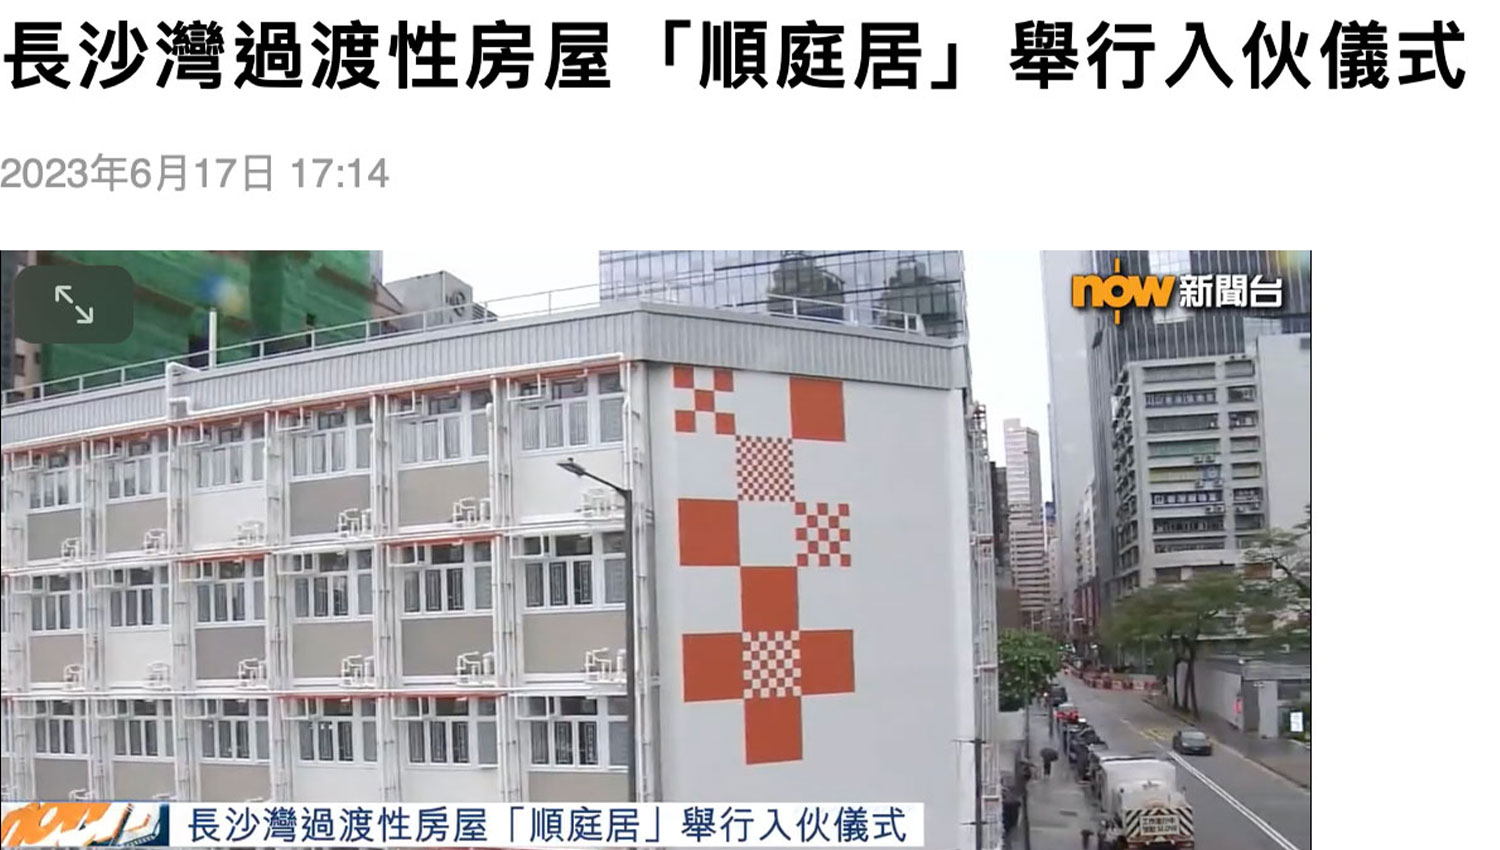 Cover Image - Now News - Shun Ting Terraced Home, a transitional housing in Cheung Sha Wan, holds a move-in ceremony.